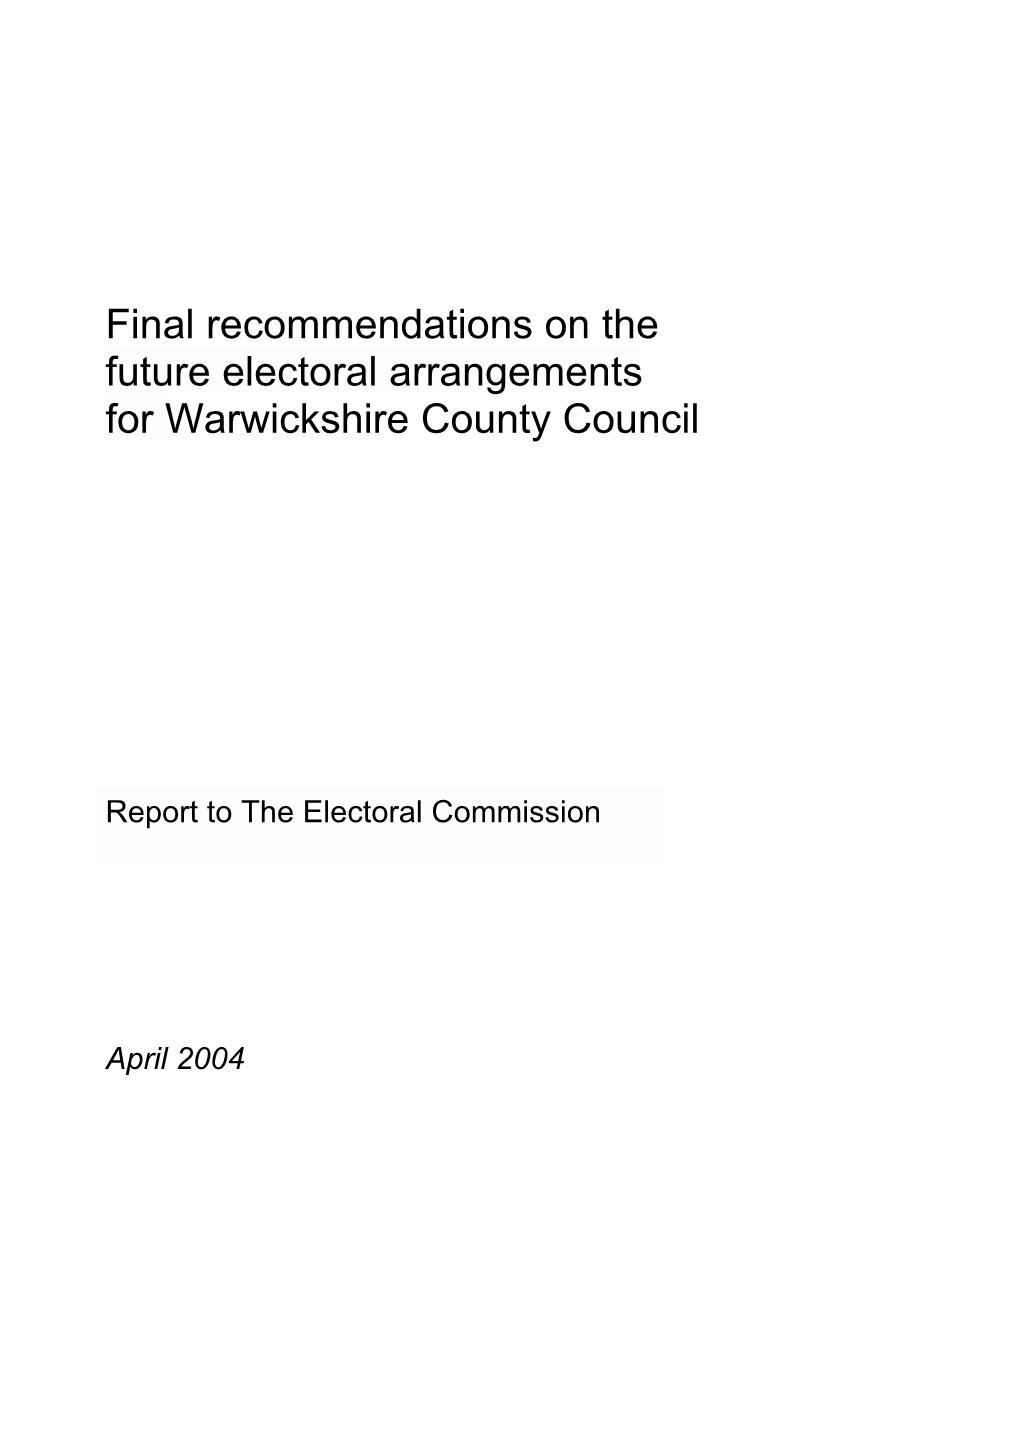 Final Recommendations on the Future Electoral Arrangements for Warwickshire County Council